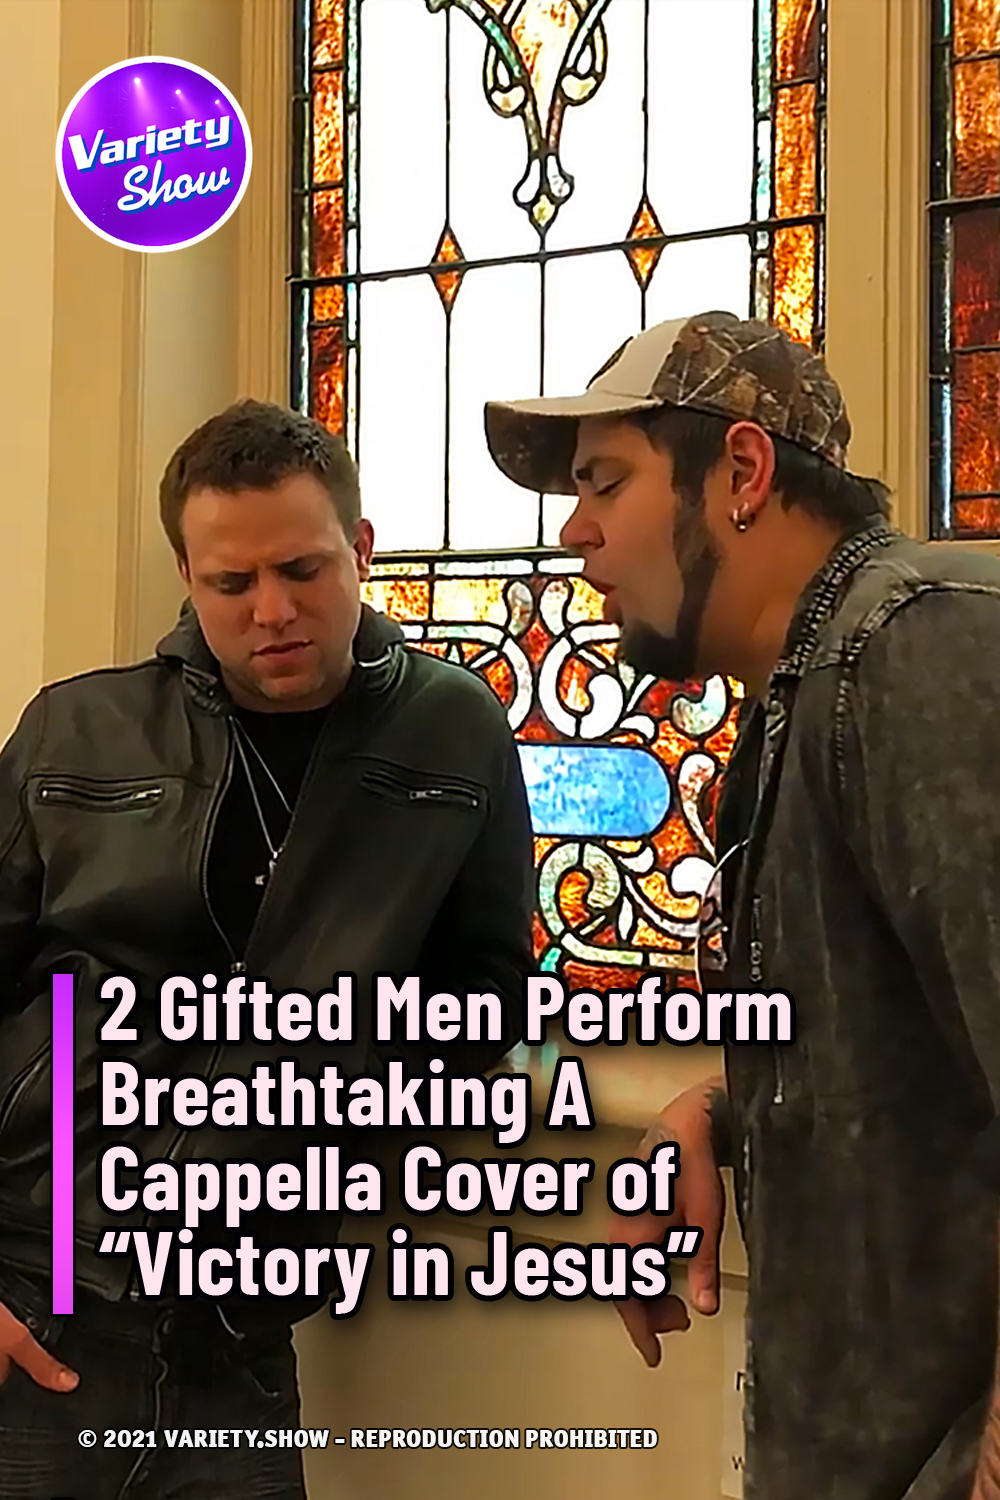 2 Gifted Men Perform Breathtaking A Cappella Cover of “Victory in Jesus”